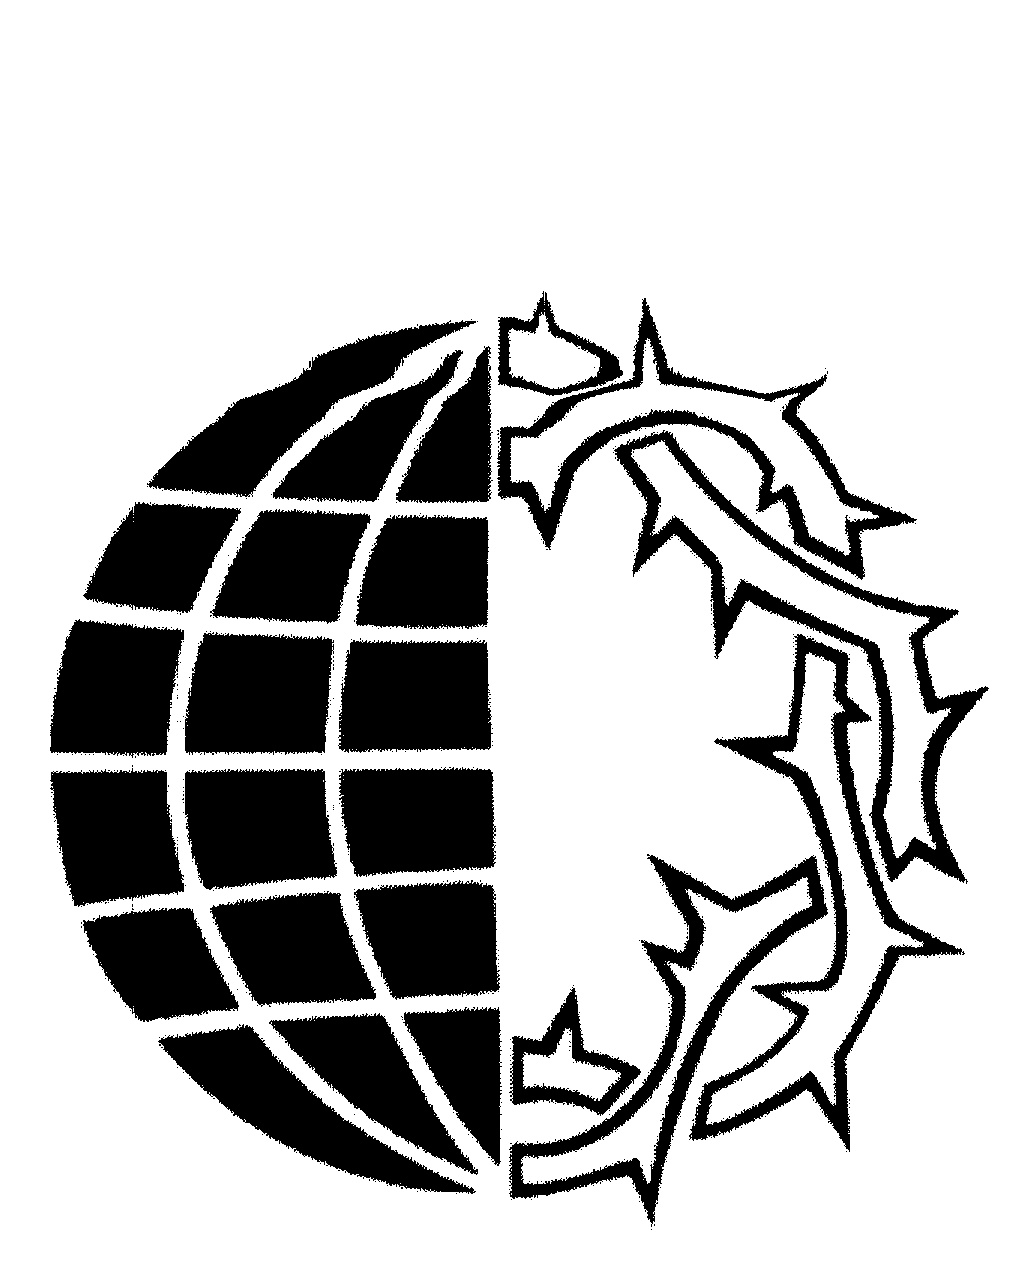 Globe Line Drawing - ClipArt Best